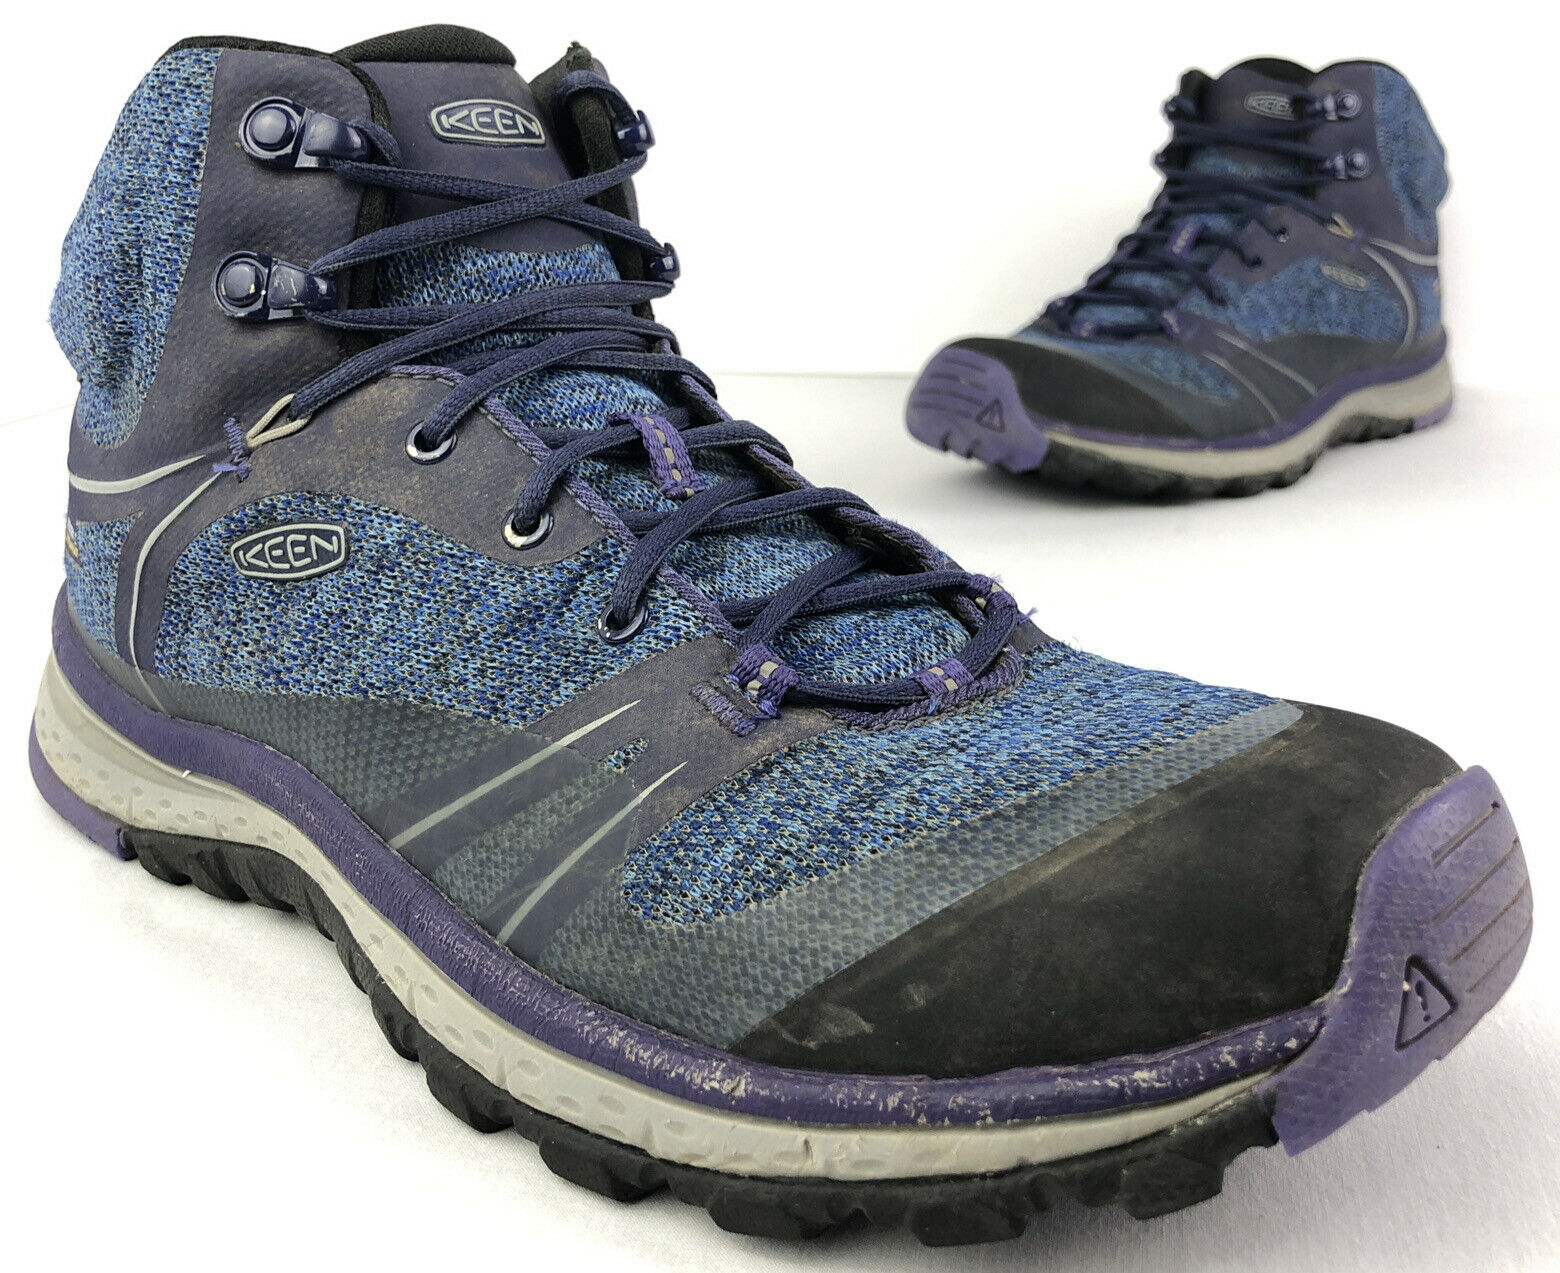 Keen Terradora Mid WP Hiking Outdoor Boots Shoes Ankle Women’s 10 EUR 40.5 Blue